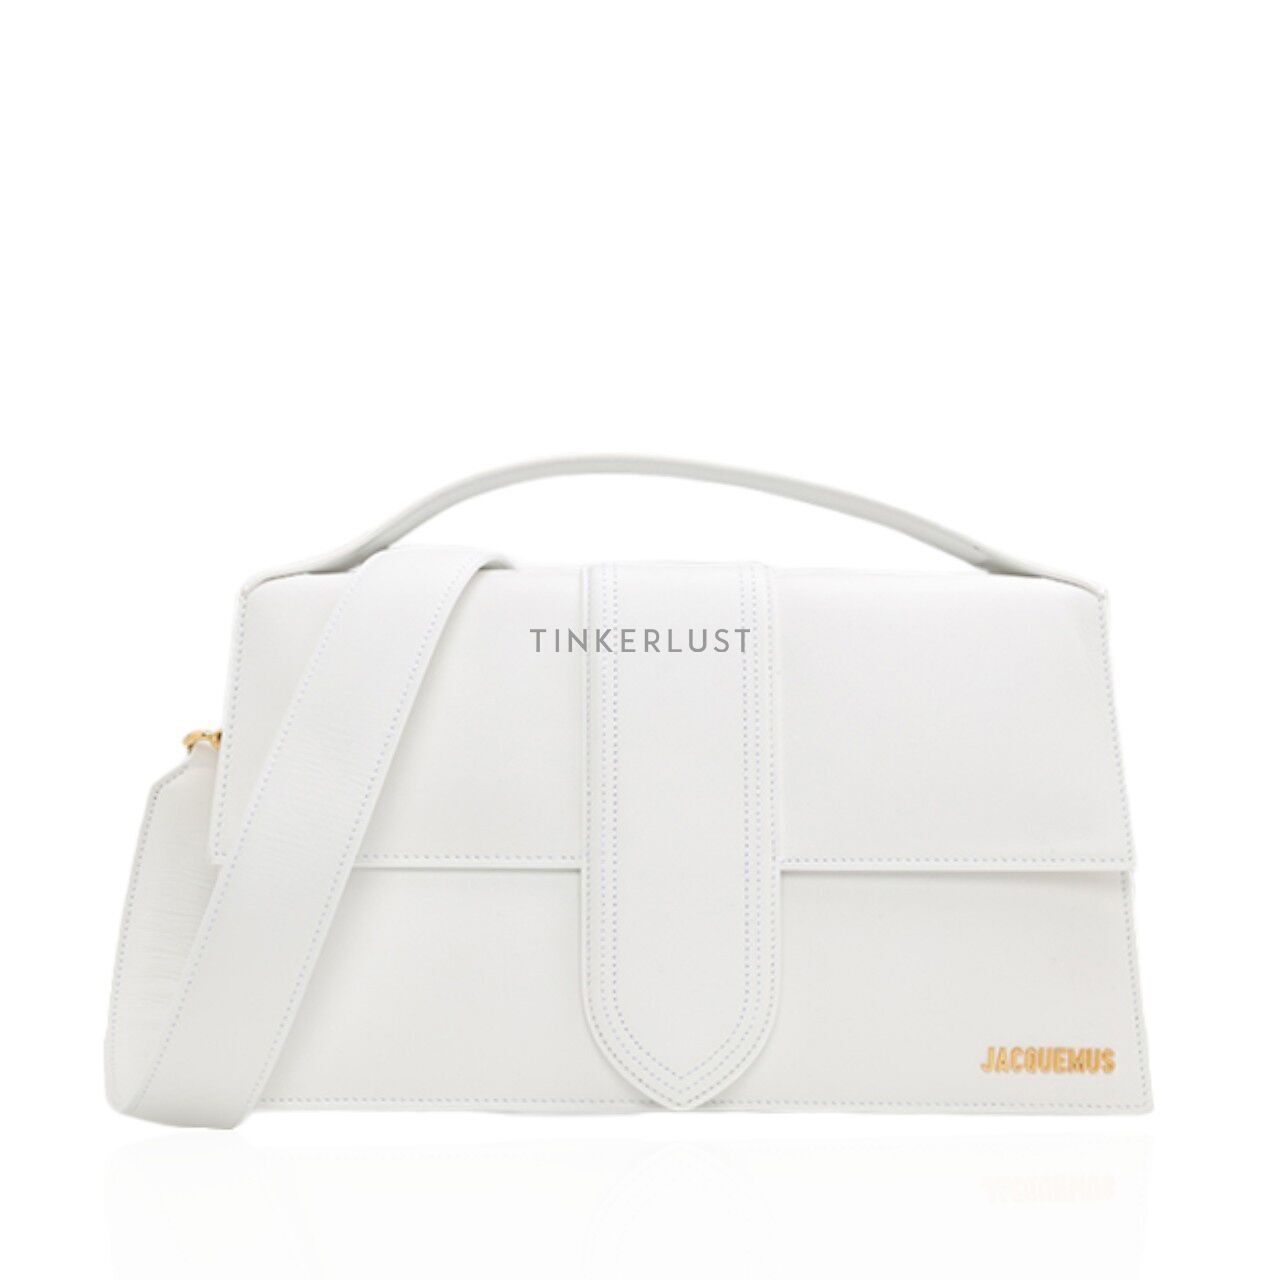 Jacquemus Le Bambinou in White Smooth Leather Satchel Bag